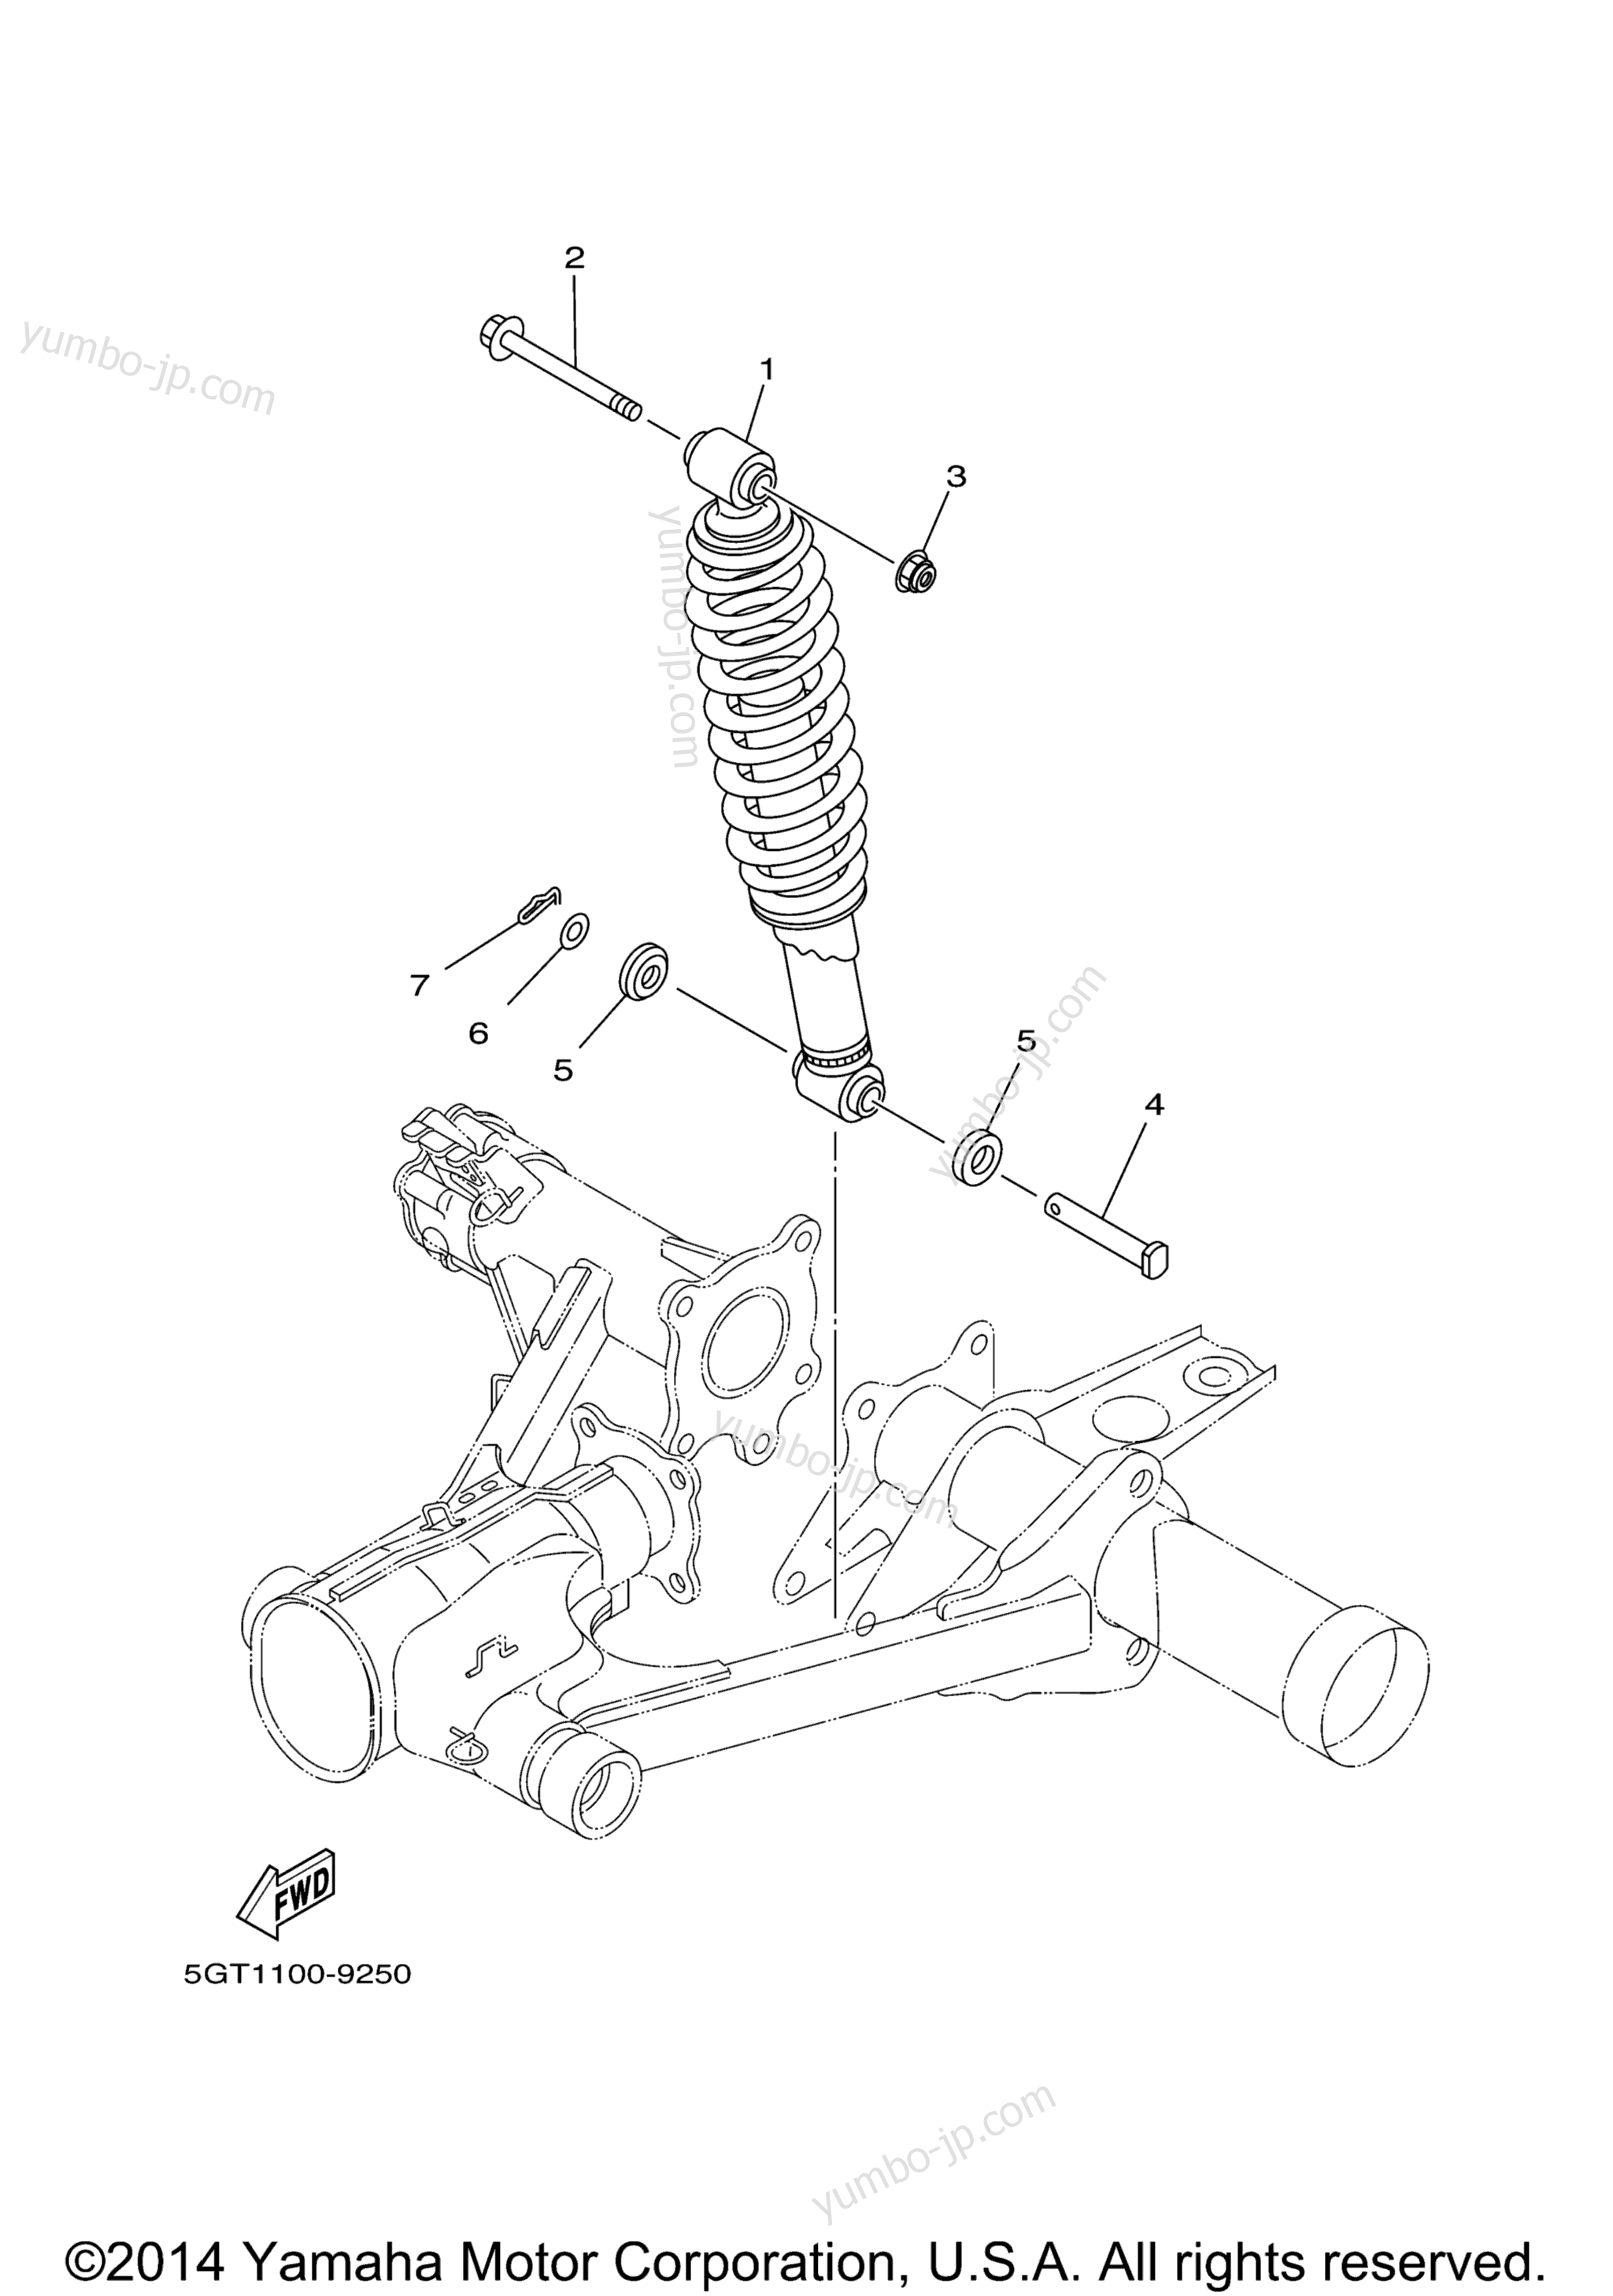 Rear Suspension for ATVs YAMAHA GRIZZLY (YFM600FMC) CA 2000 year